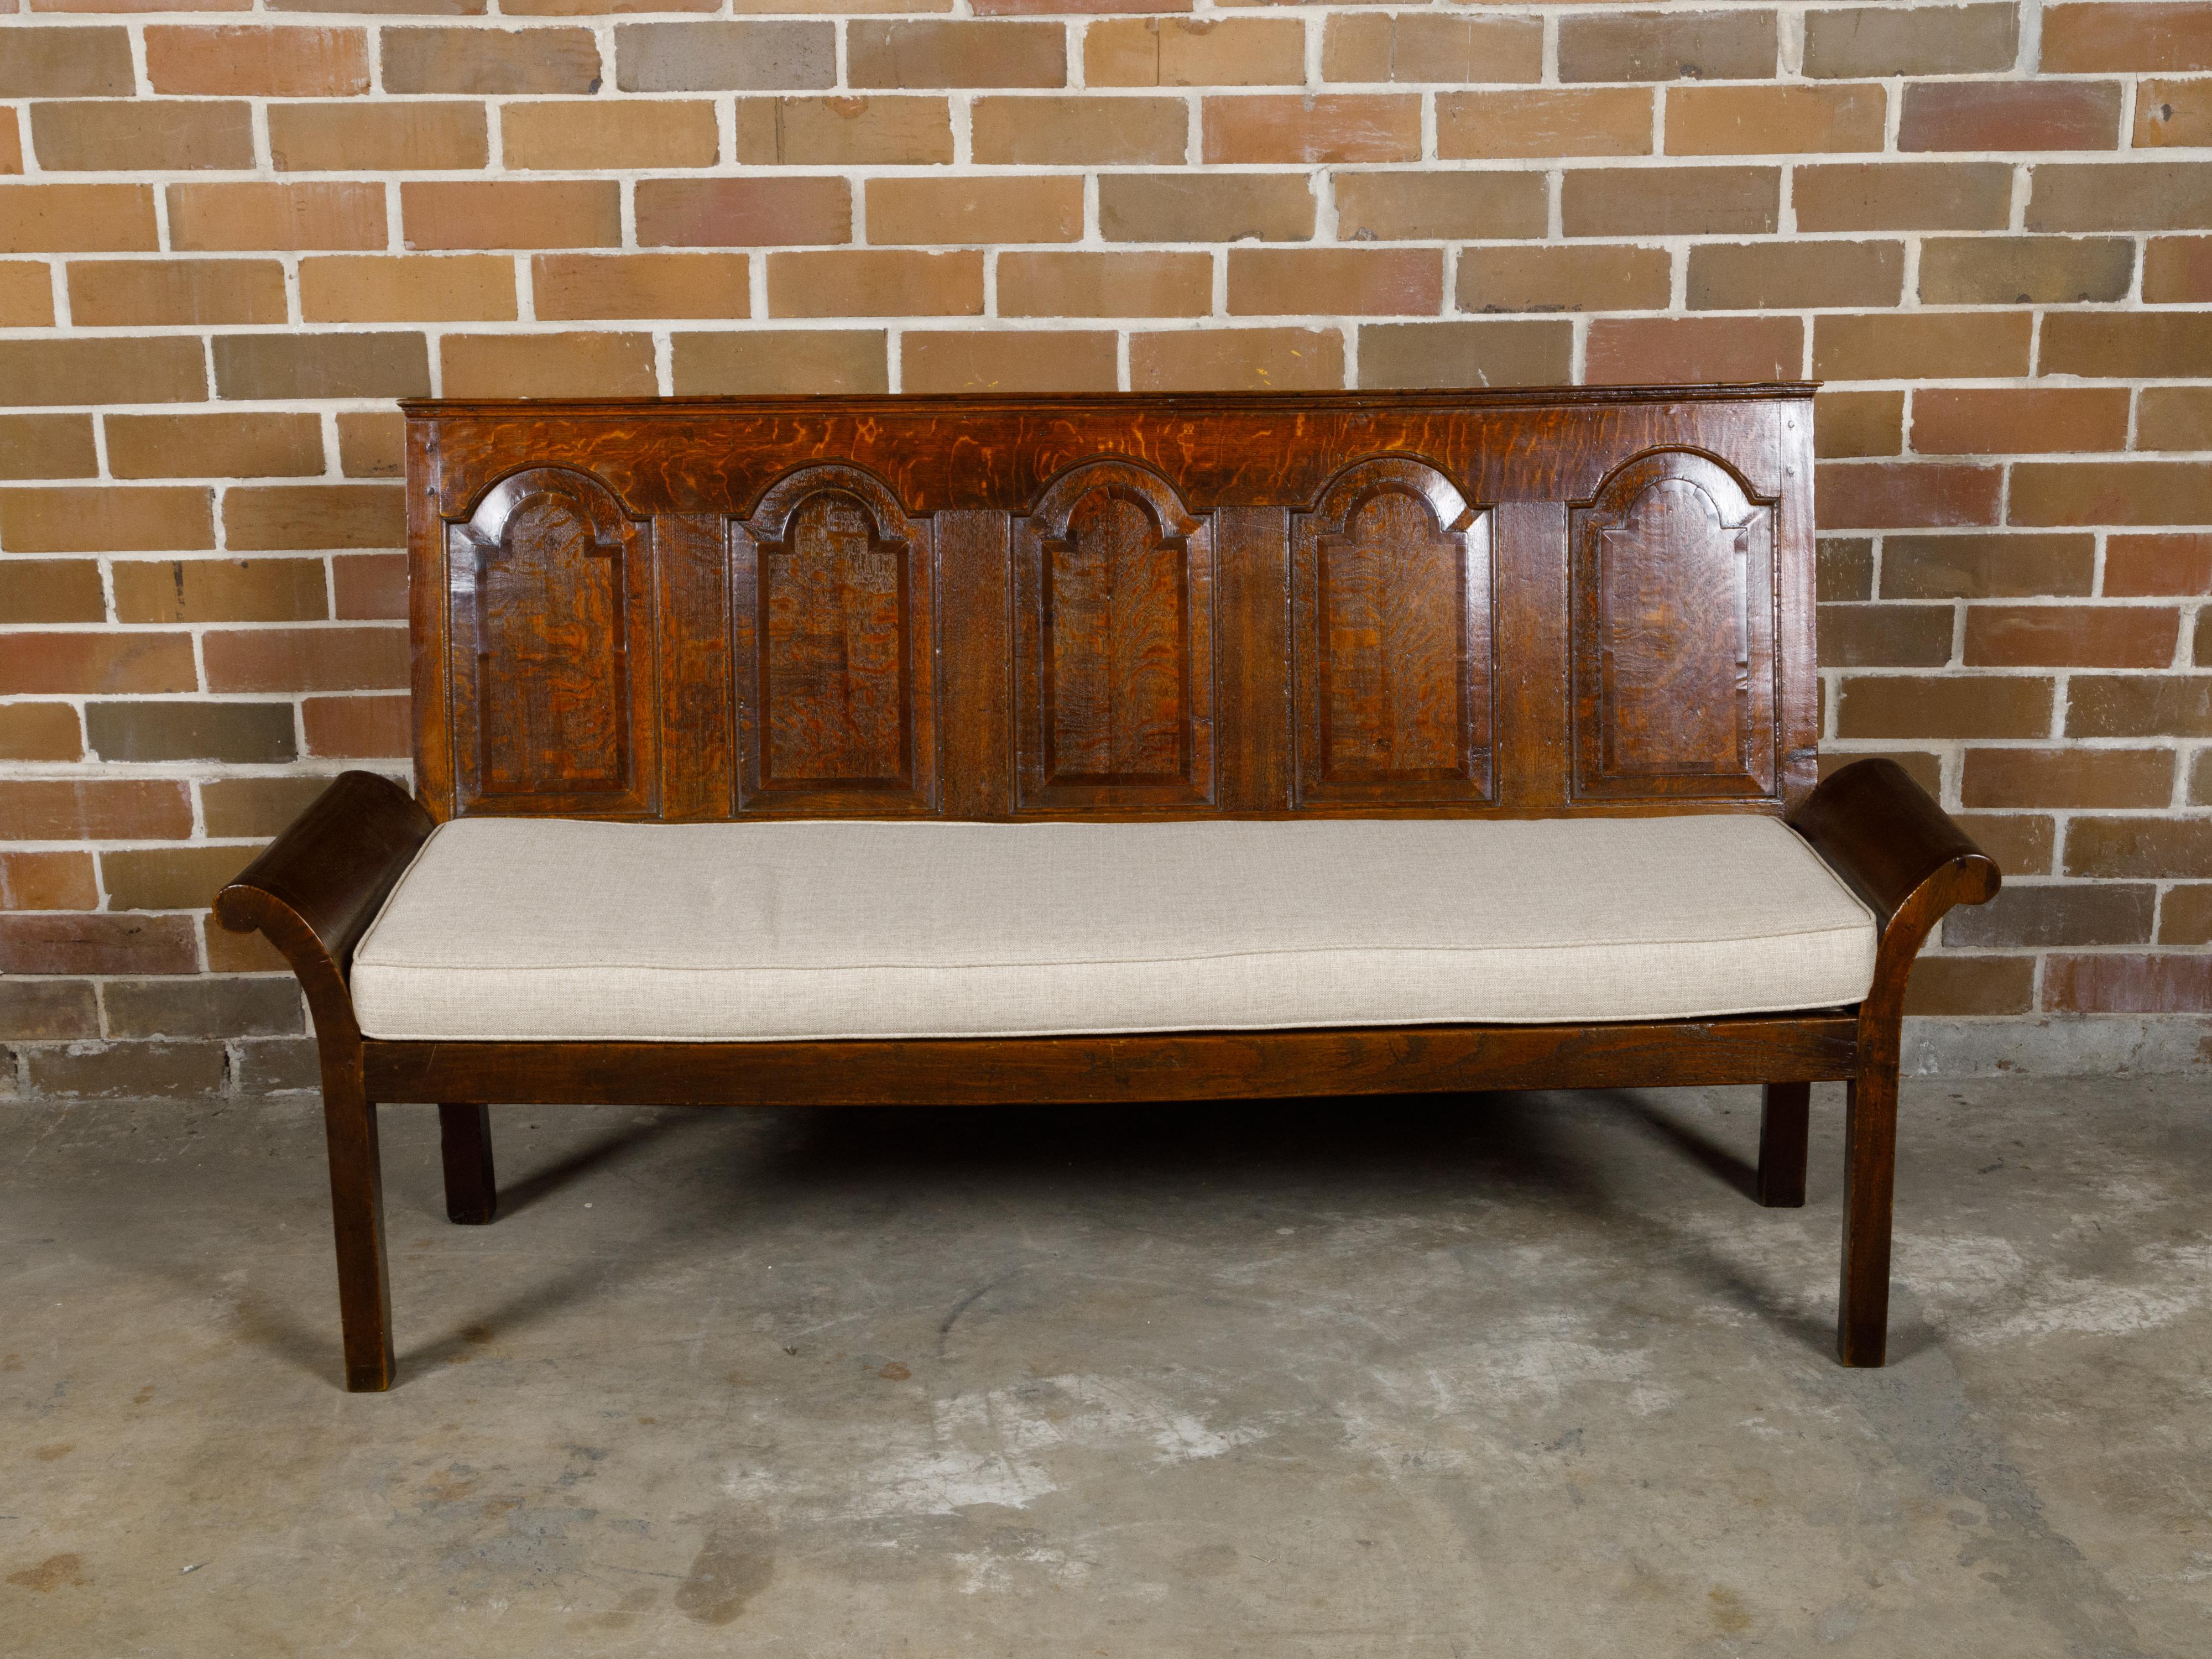 An English Georgian period oak bench from the 18th century with solid carved back, out-scrolling arms and new custom upholstered cushion. This exquisite English Georgian period oak bench from the 18th century is a remarkable piece of furniture that